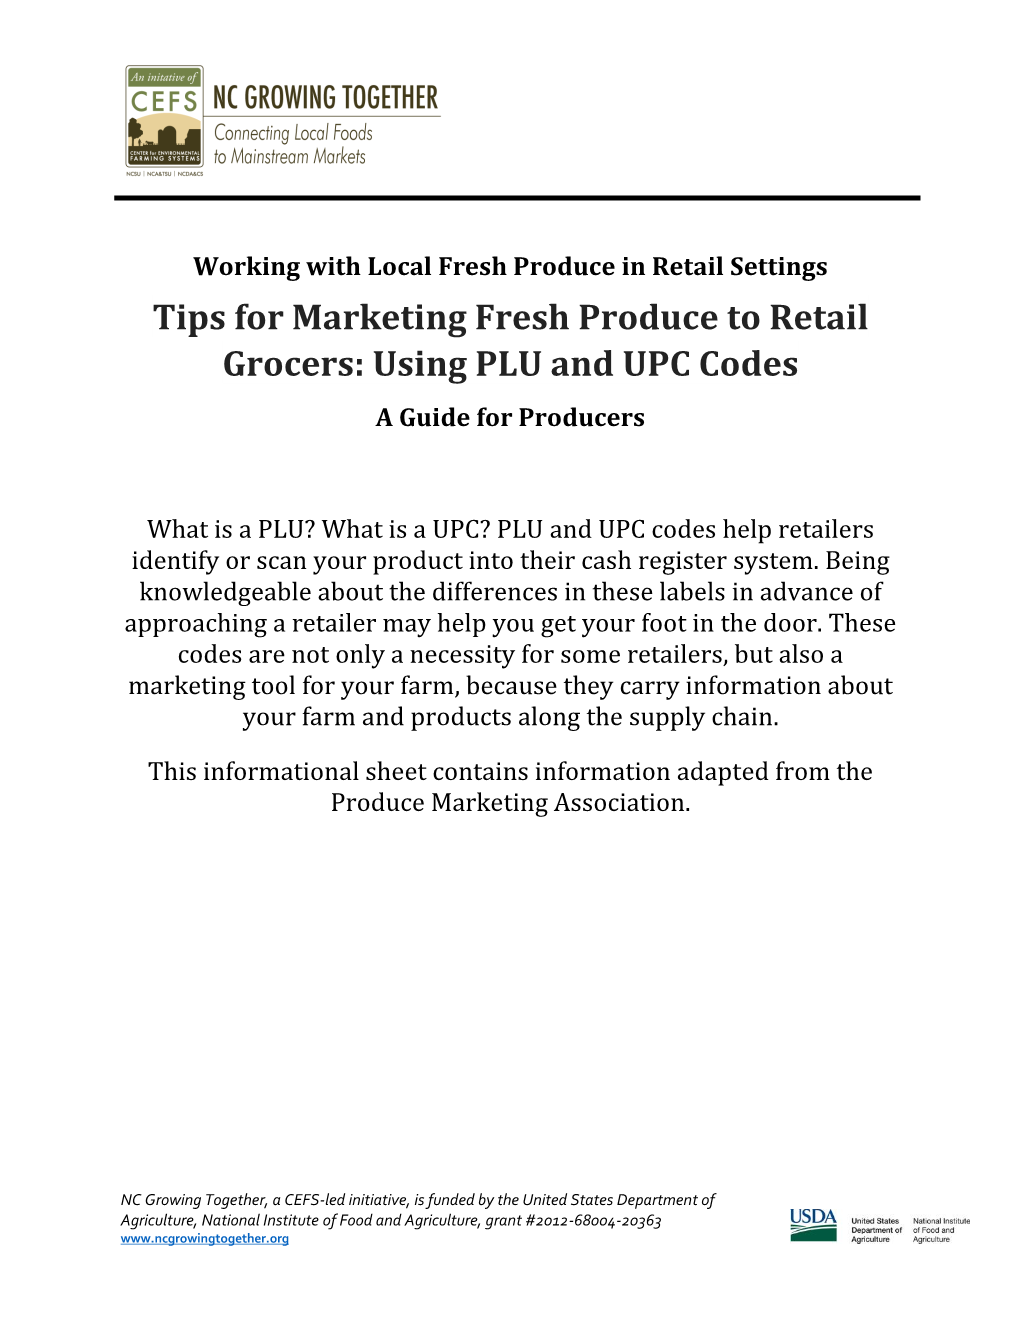 Tips for Marketing Fresh Produce to Retail Grocers: Using PLU and UPC Codes a Guide for Producers